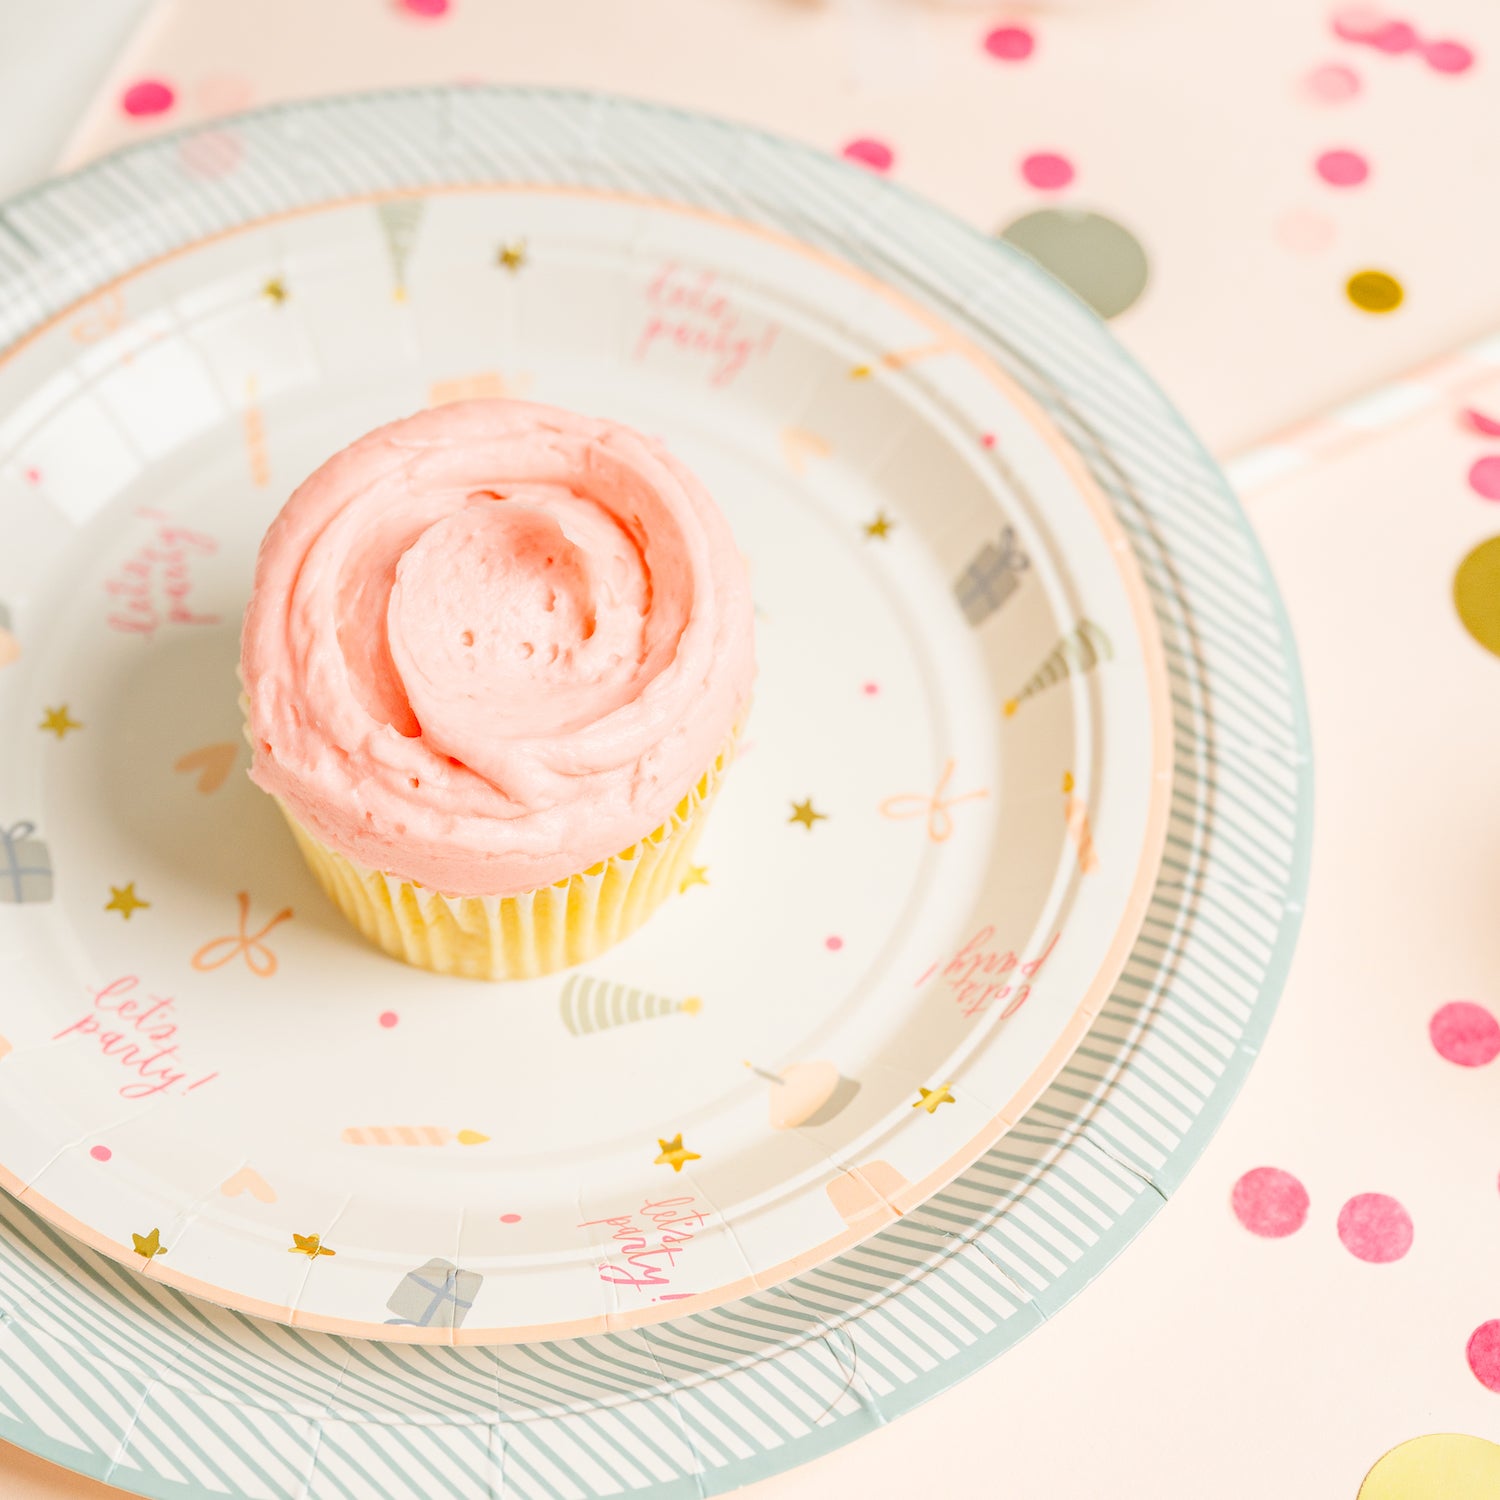 Birthday party supplies with pink cupcake